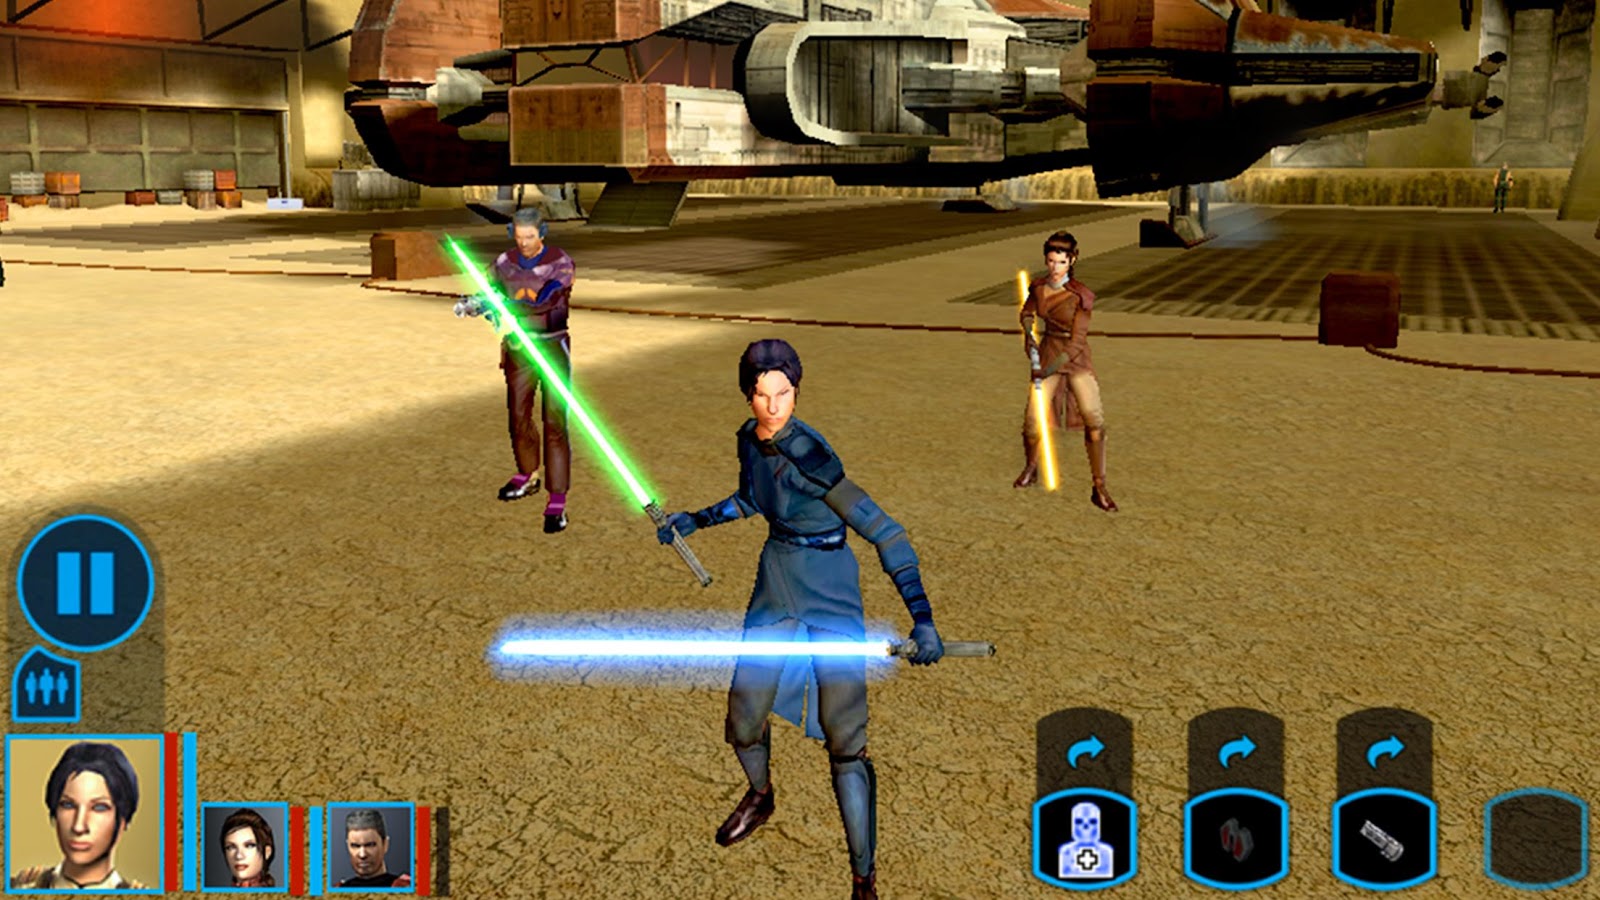 Knights of the Old Republic | Star Wars Humble Bundle 2